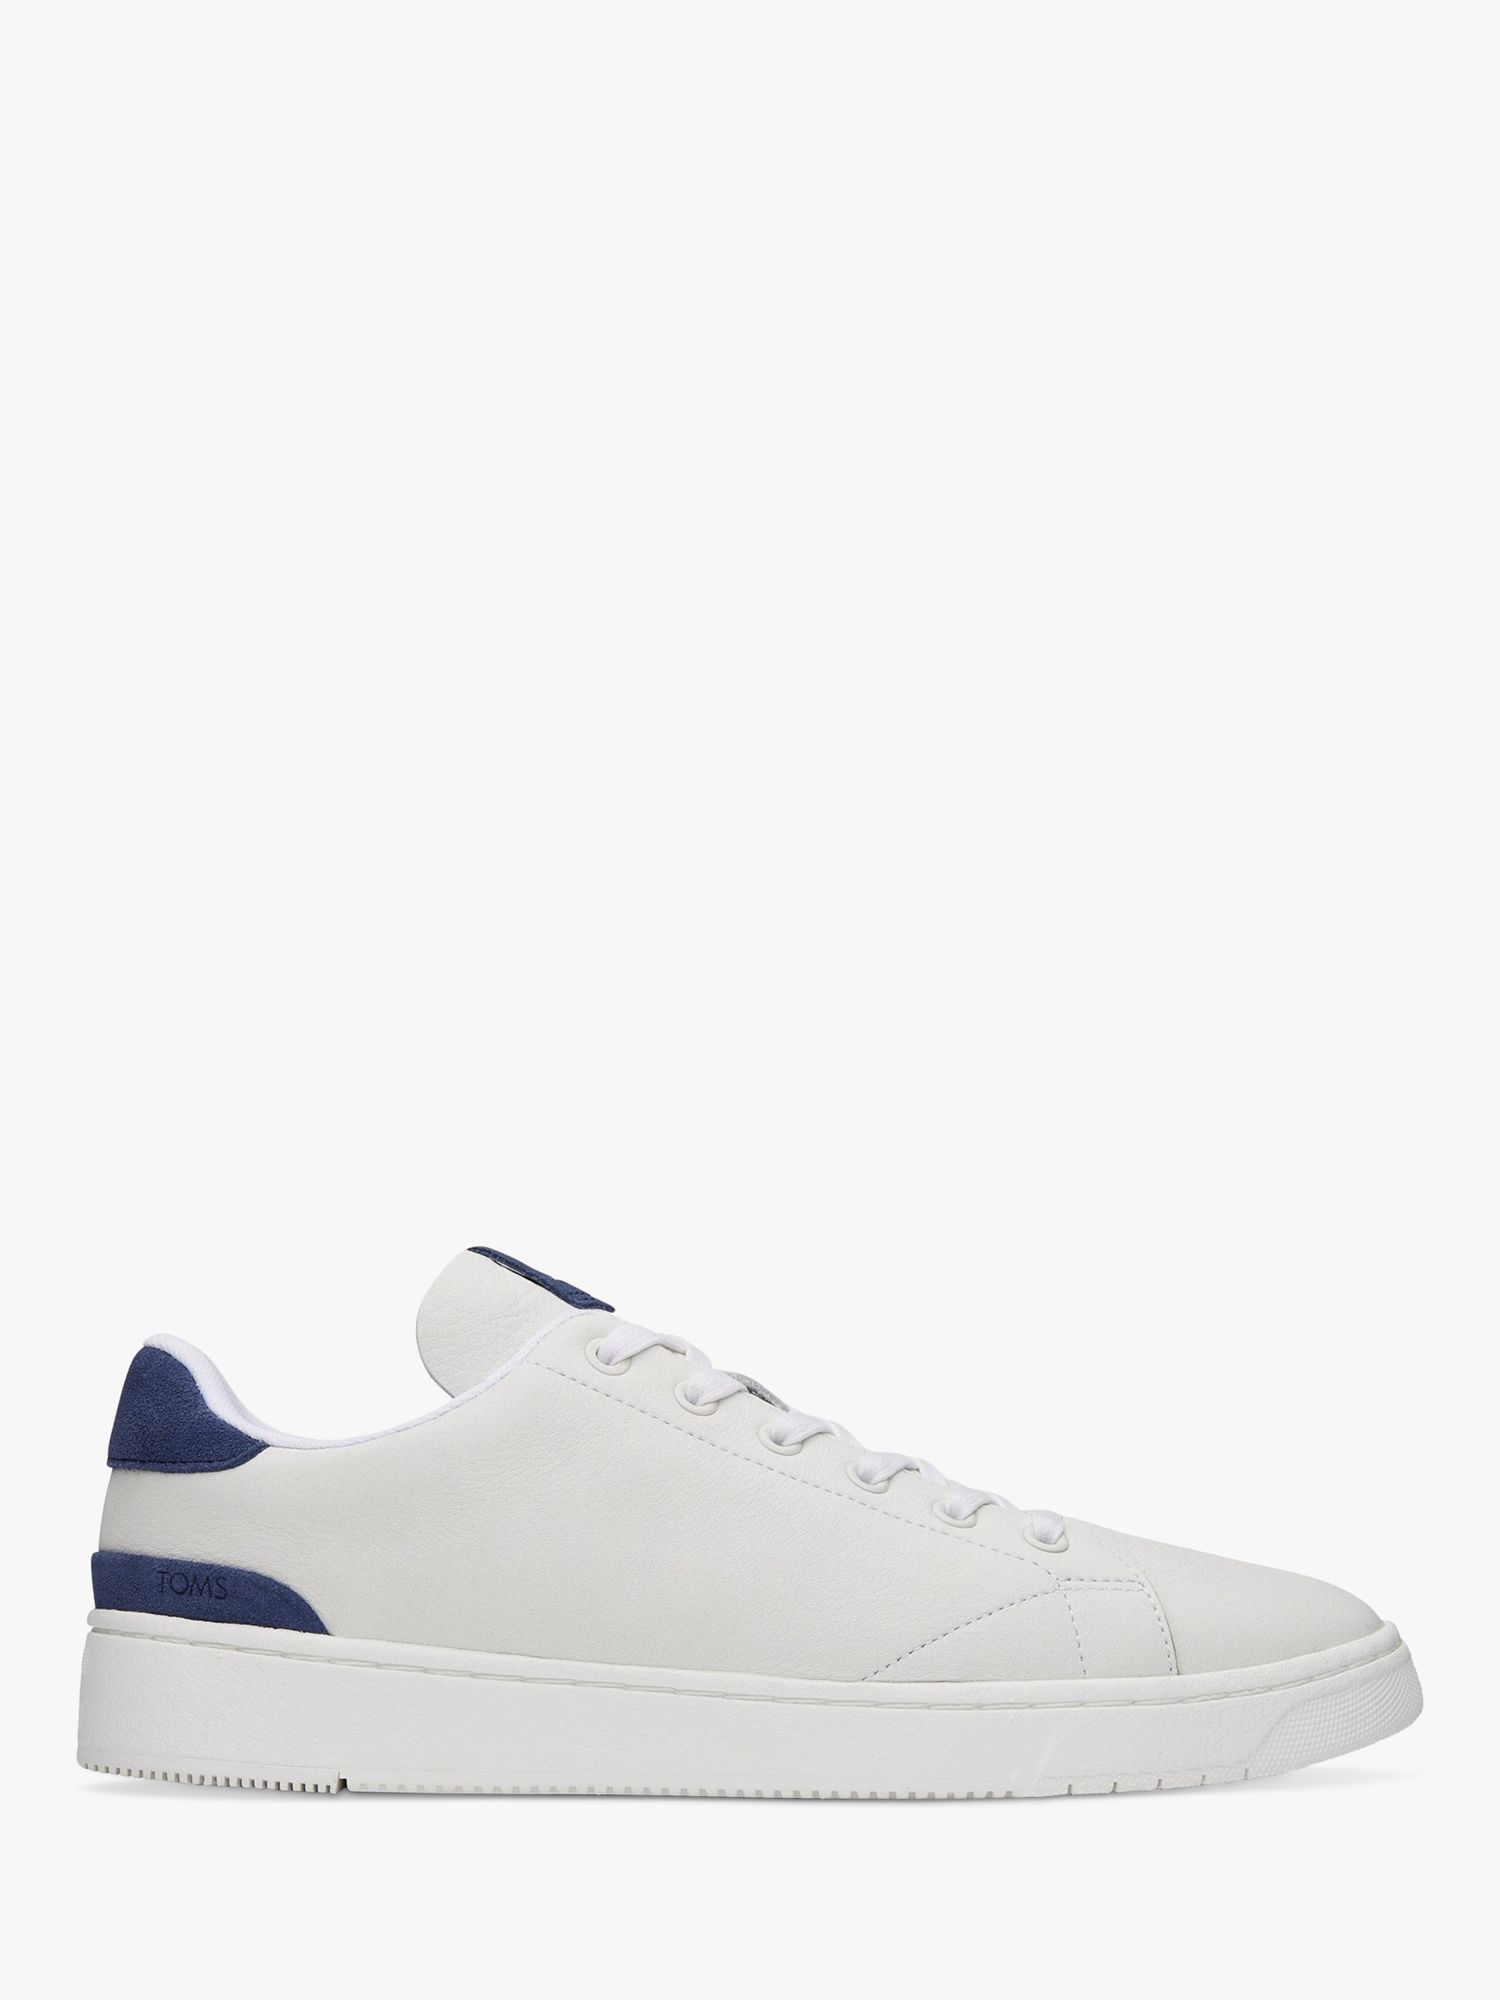 TOMS Travel LITE 2.0 Low Trainers, White at John Lewis & Partners